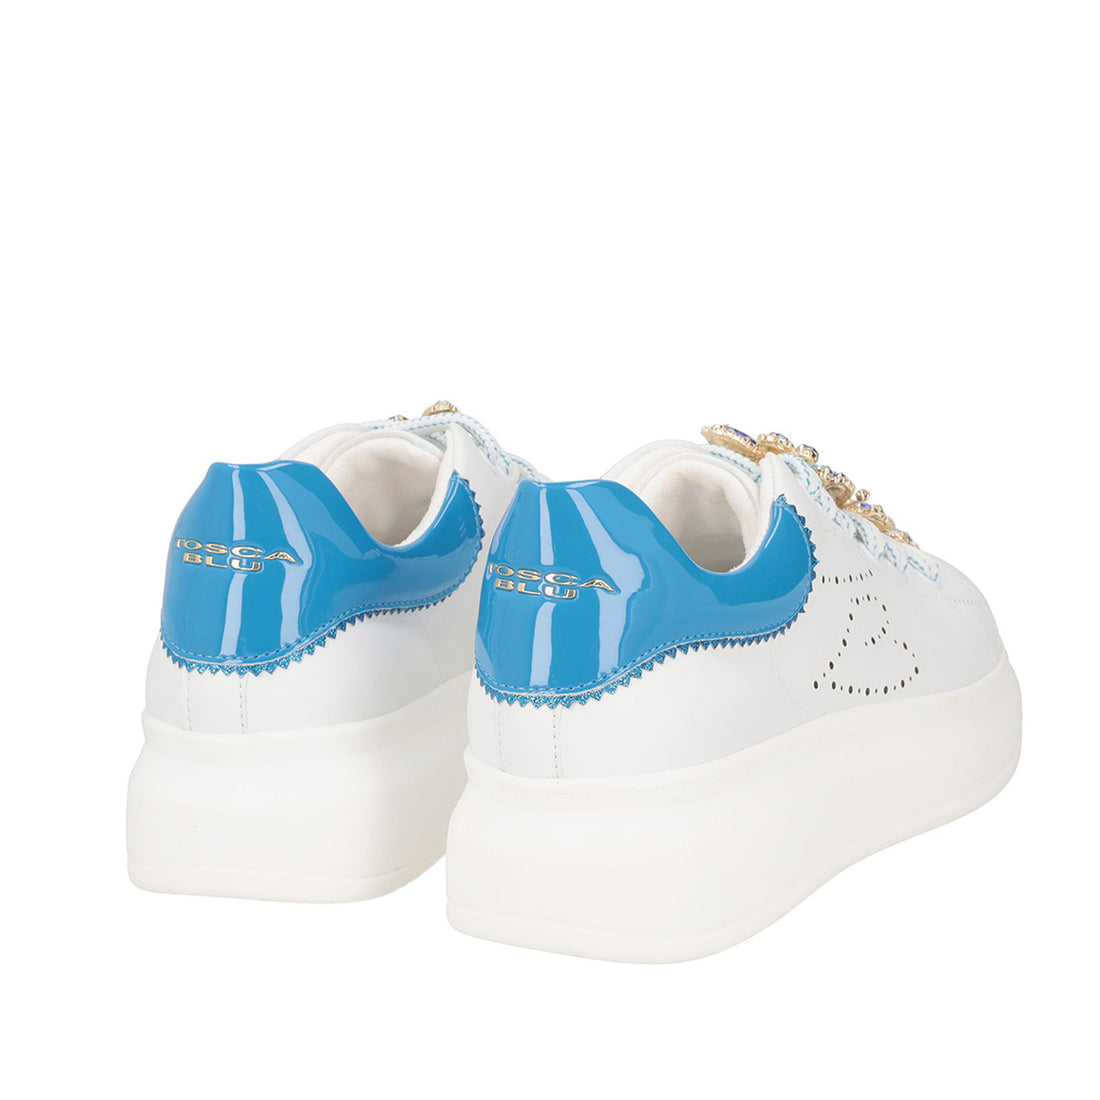 WHITE/BLUETTE GLAMOUR SNEAKER WITH BUTTERFLY ACCESSORY